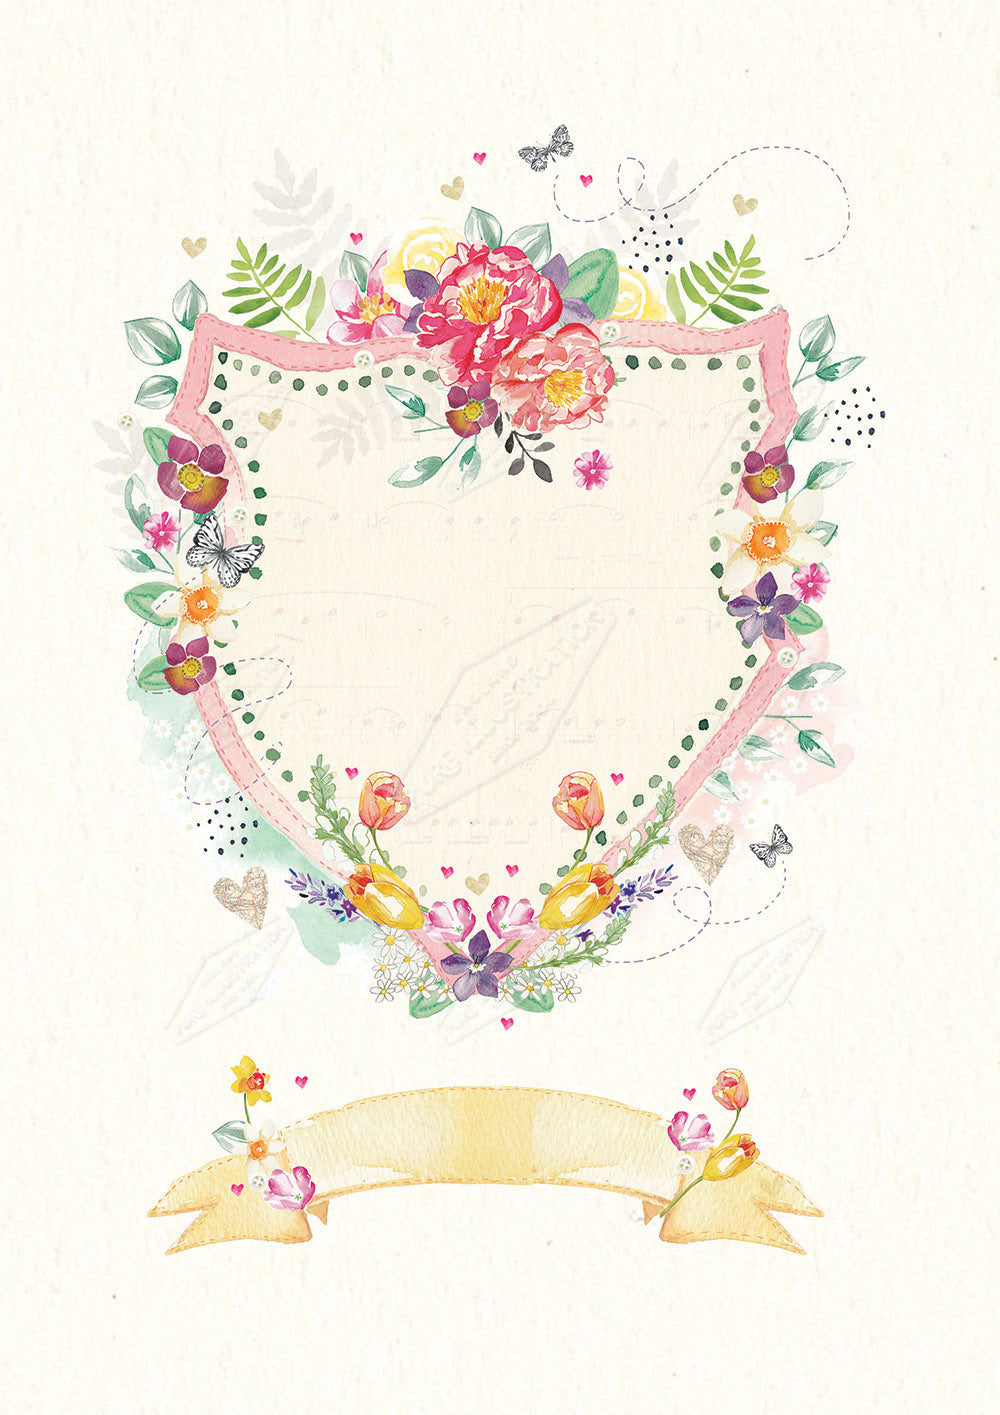 00027728EST- Emily Stalley is represented by Pure Art Licensing Agency - Wedding Greeting Card Design